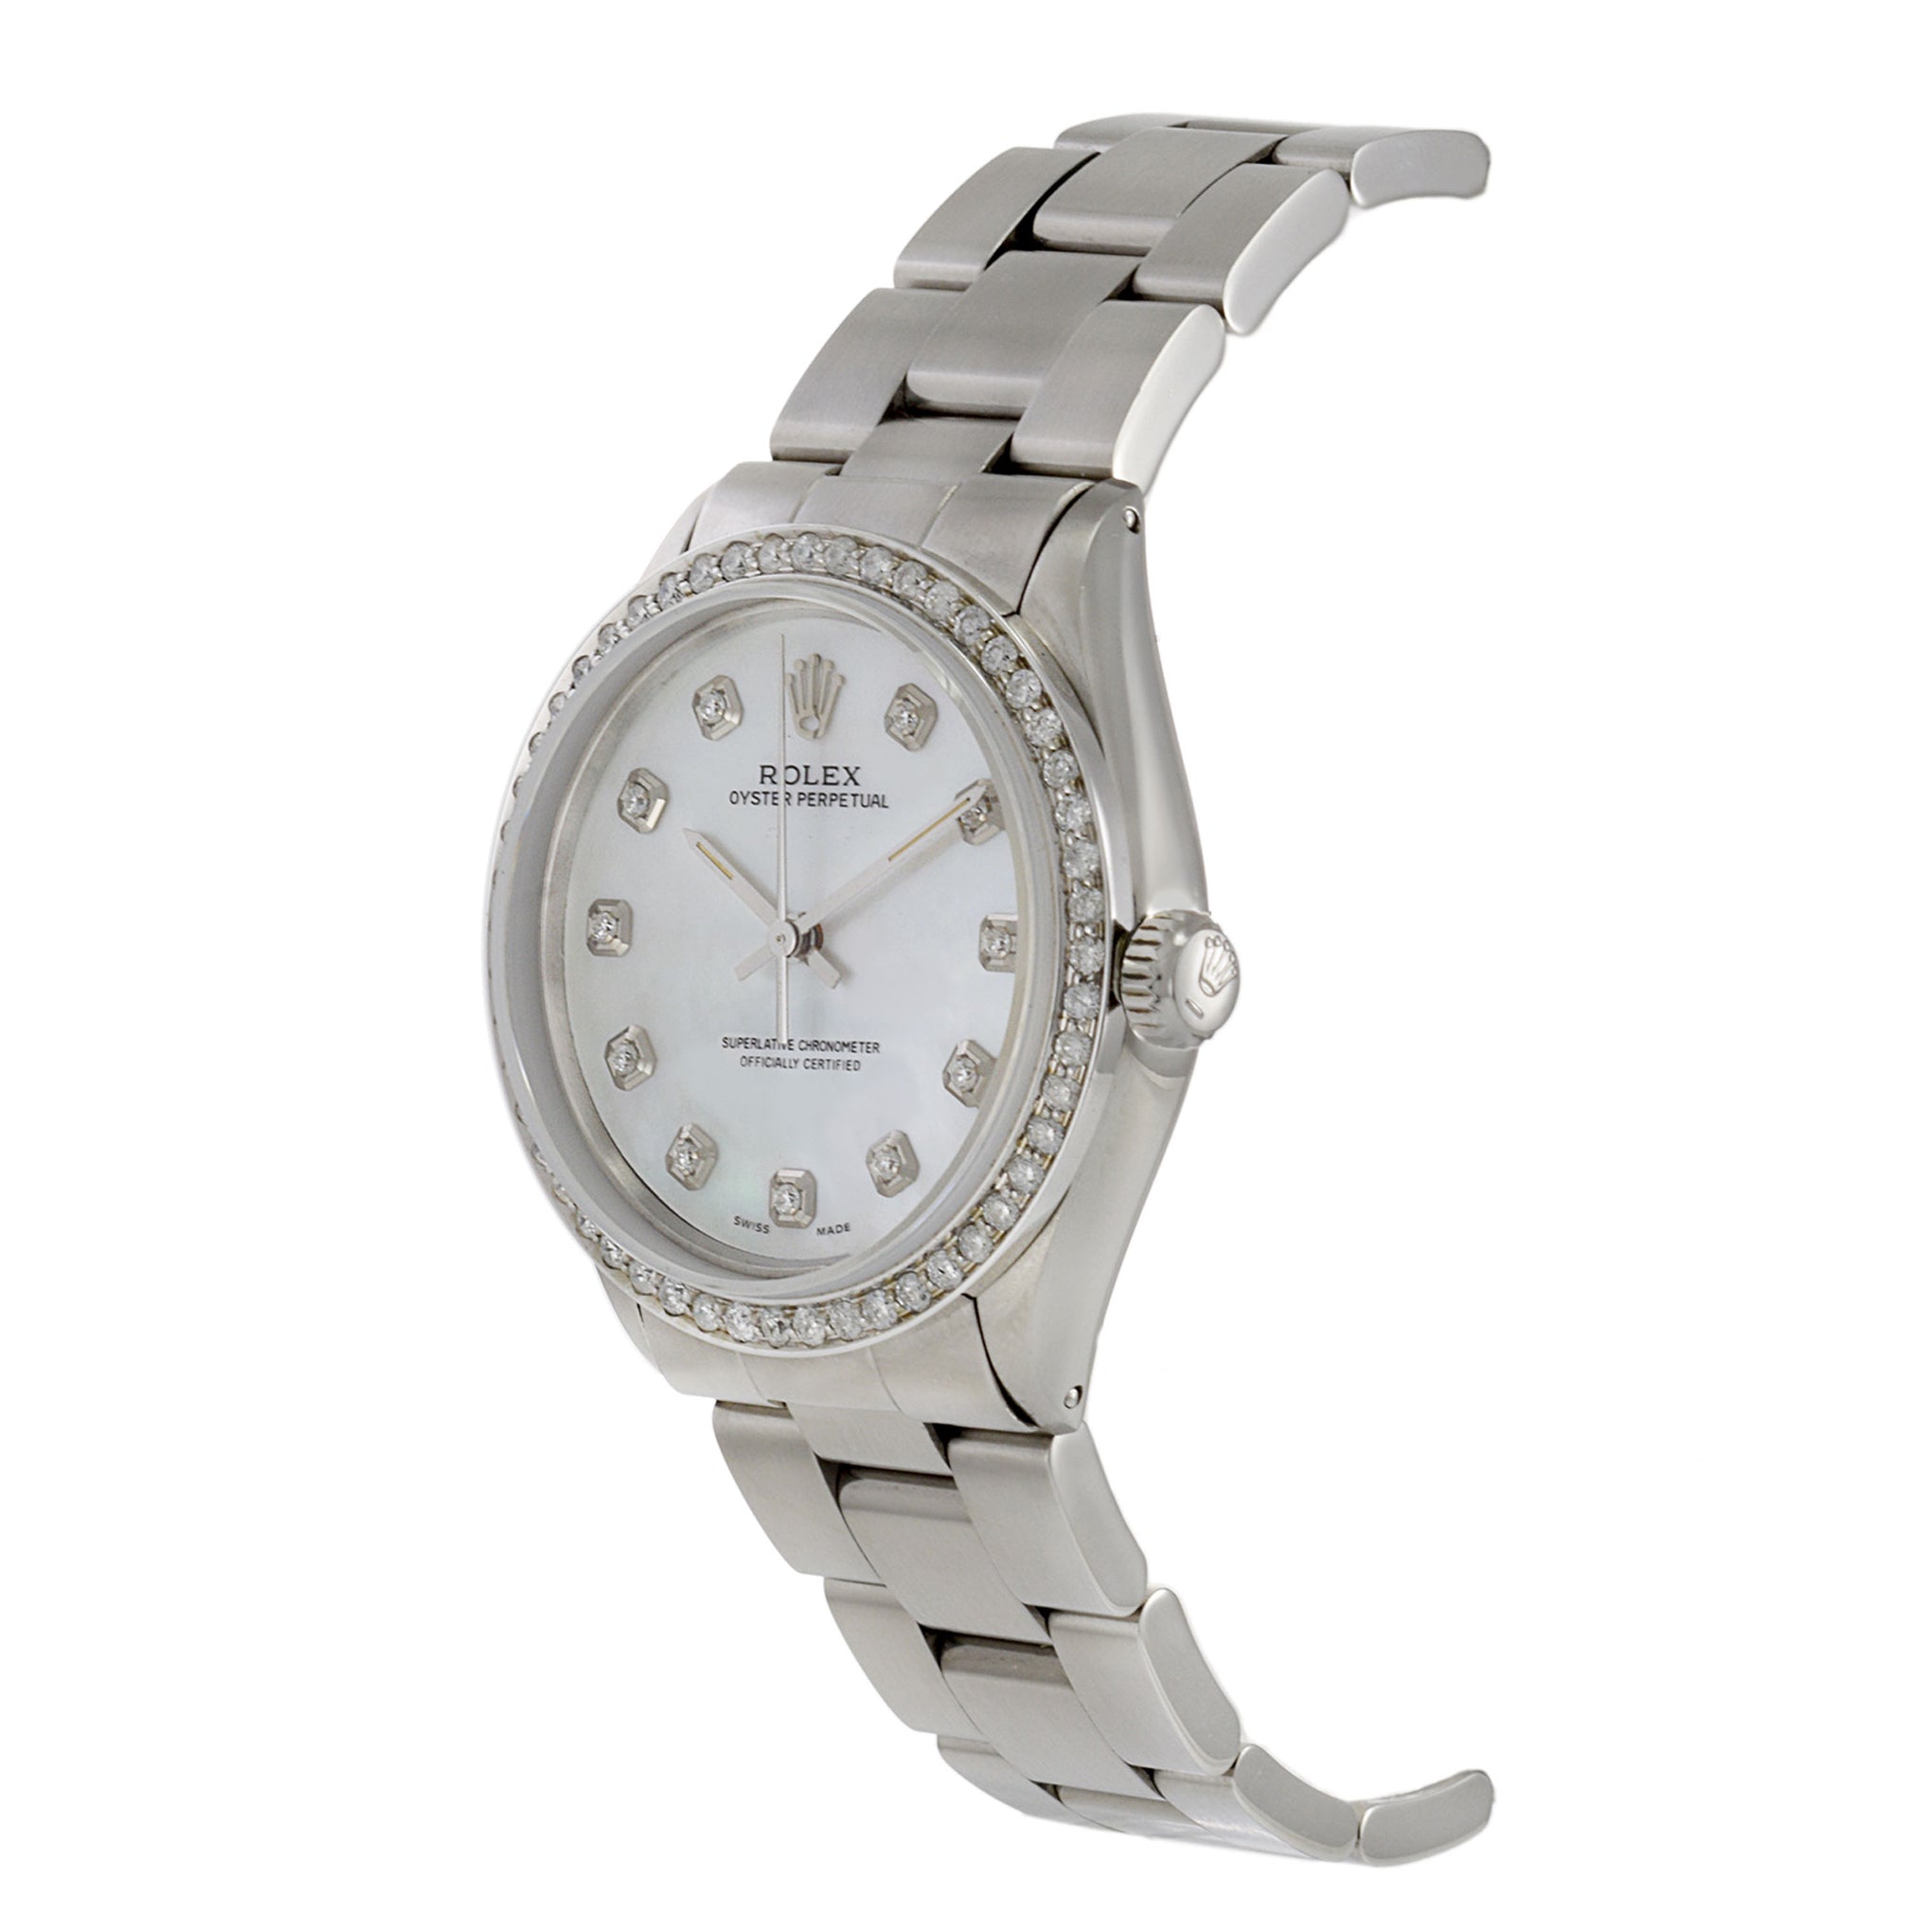 Rolex Oyster Perpetual Reference 5500 34mm Mother Of Pearl Dial Diamond Watch